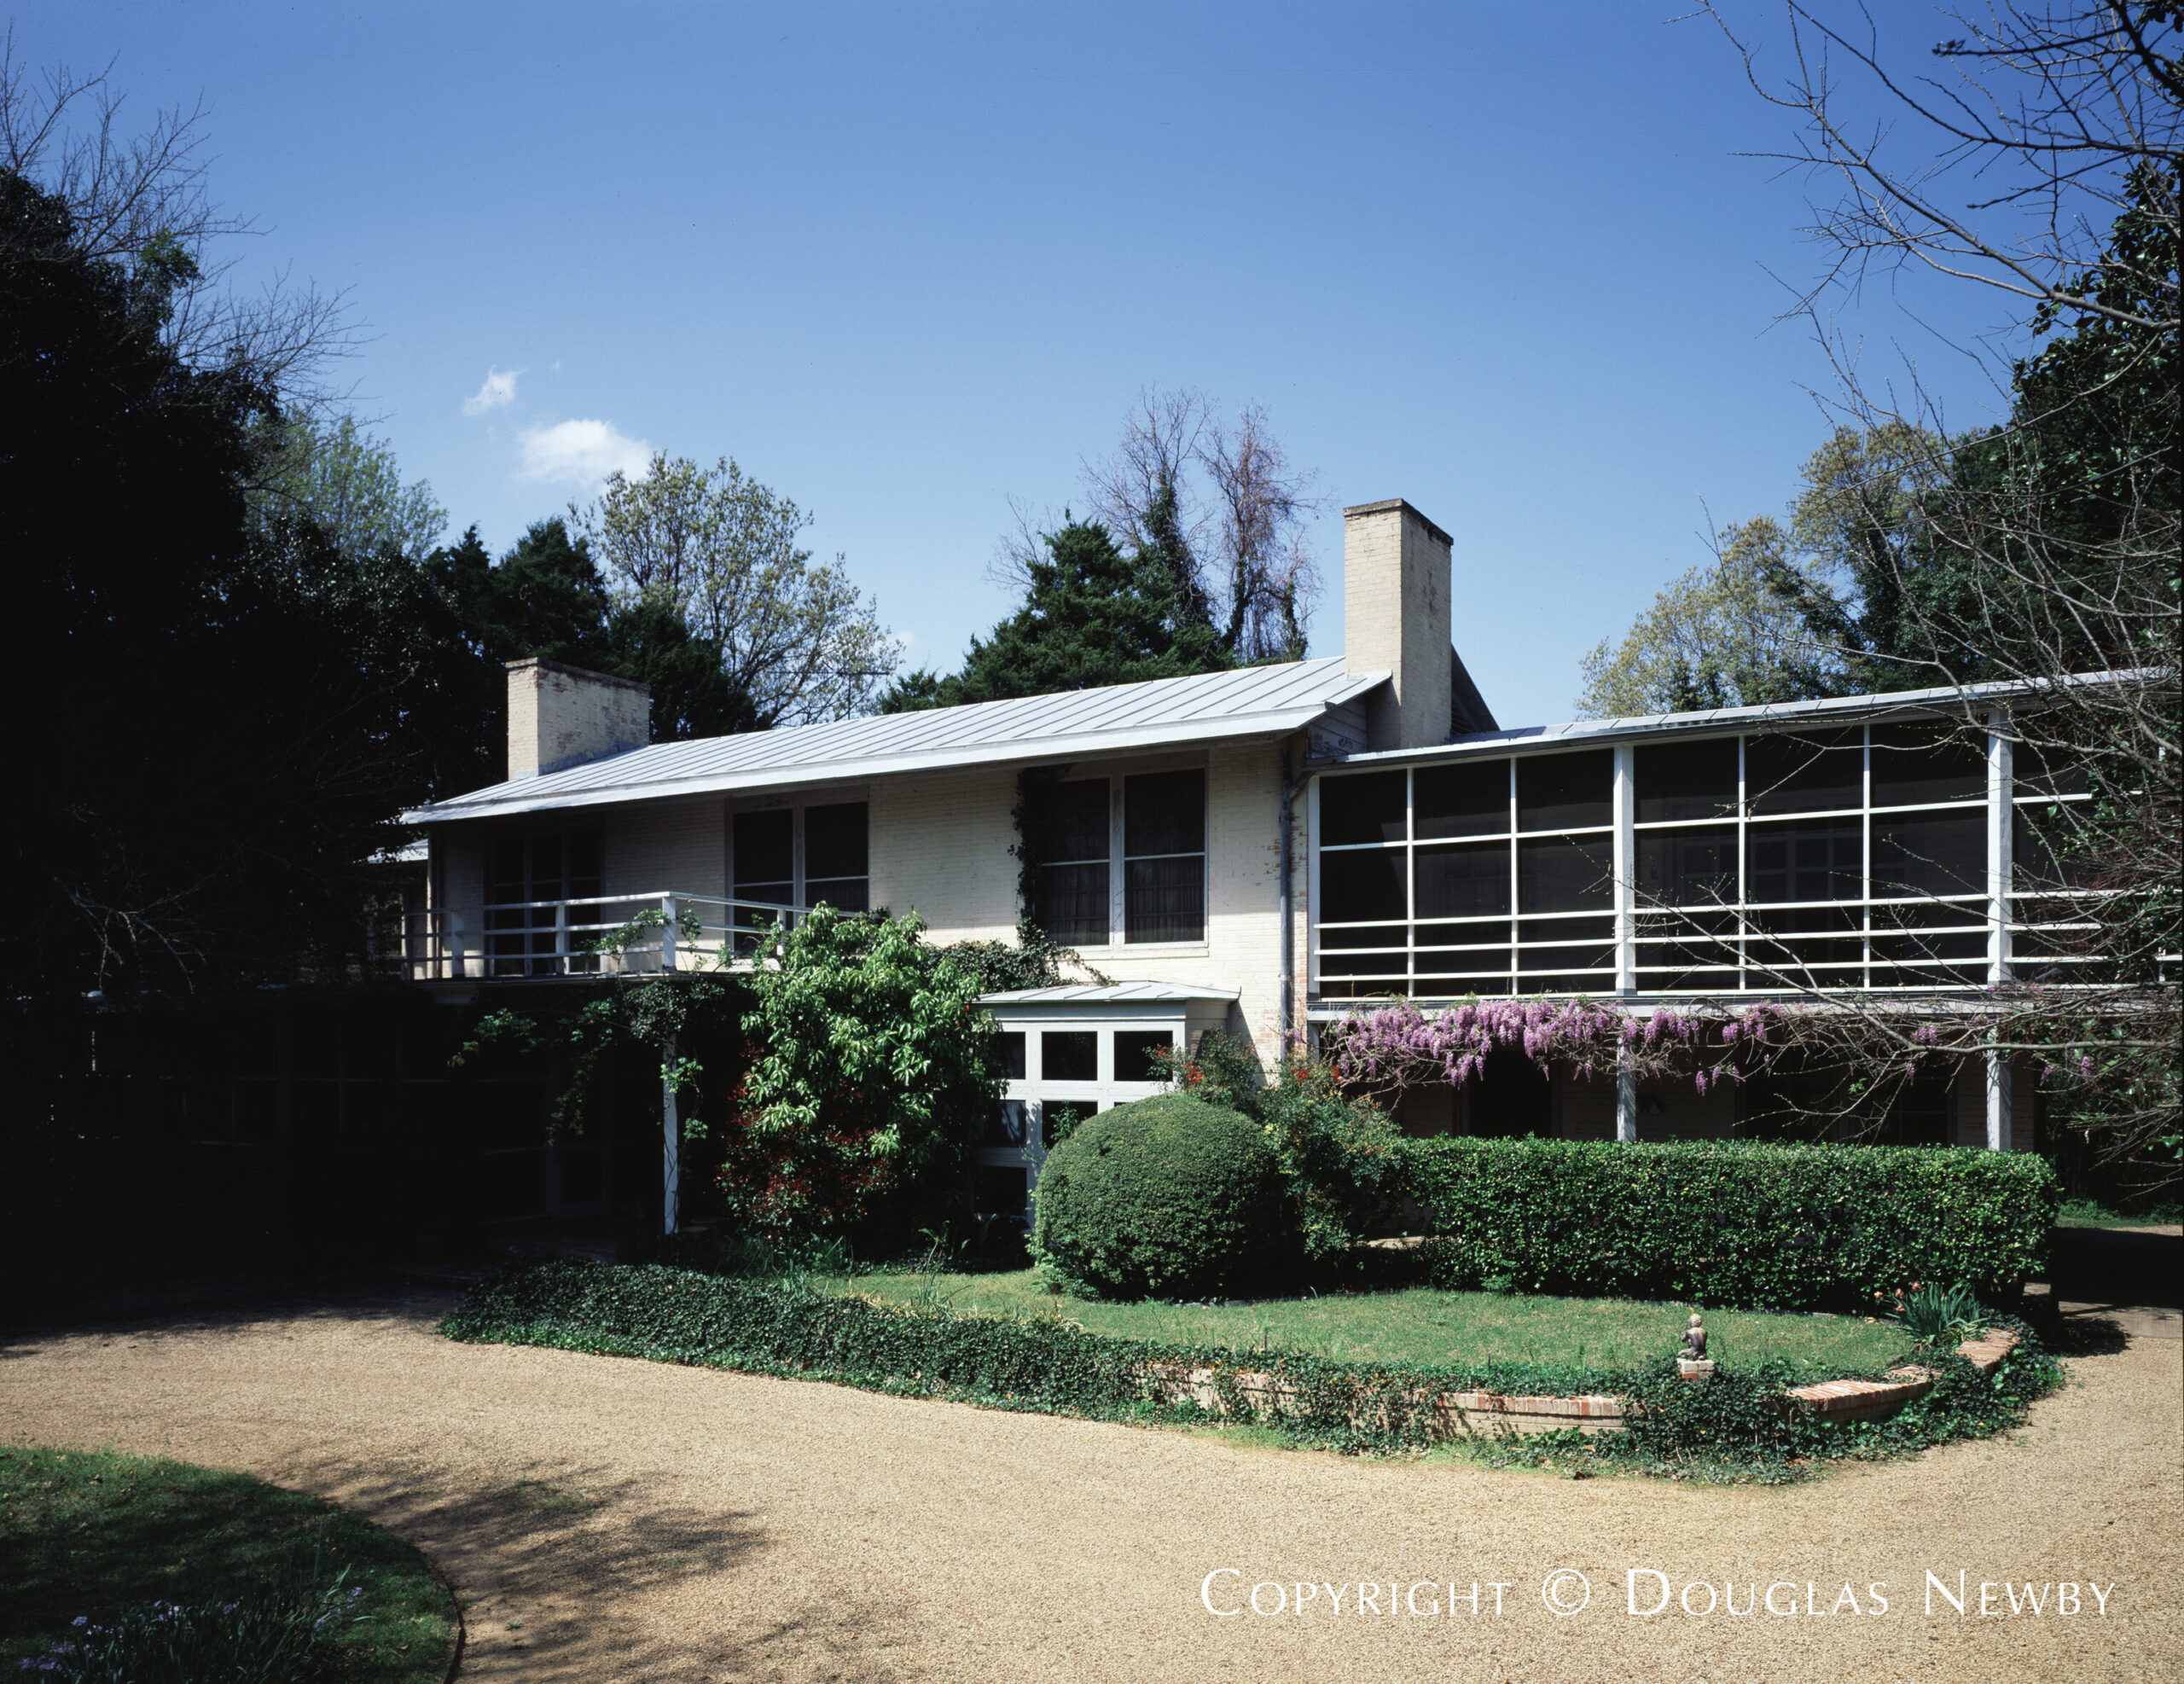 Preservation Dallas 50th Anniversary Home Tour Celebrates Architects and Neighborhoods